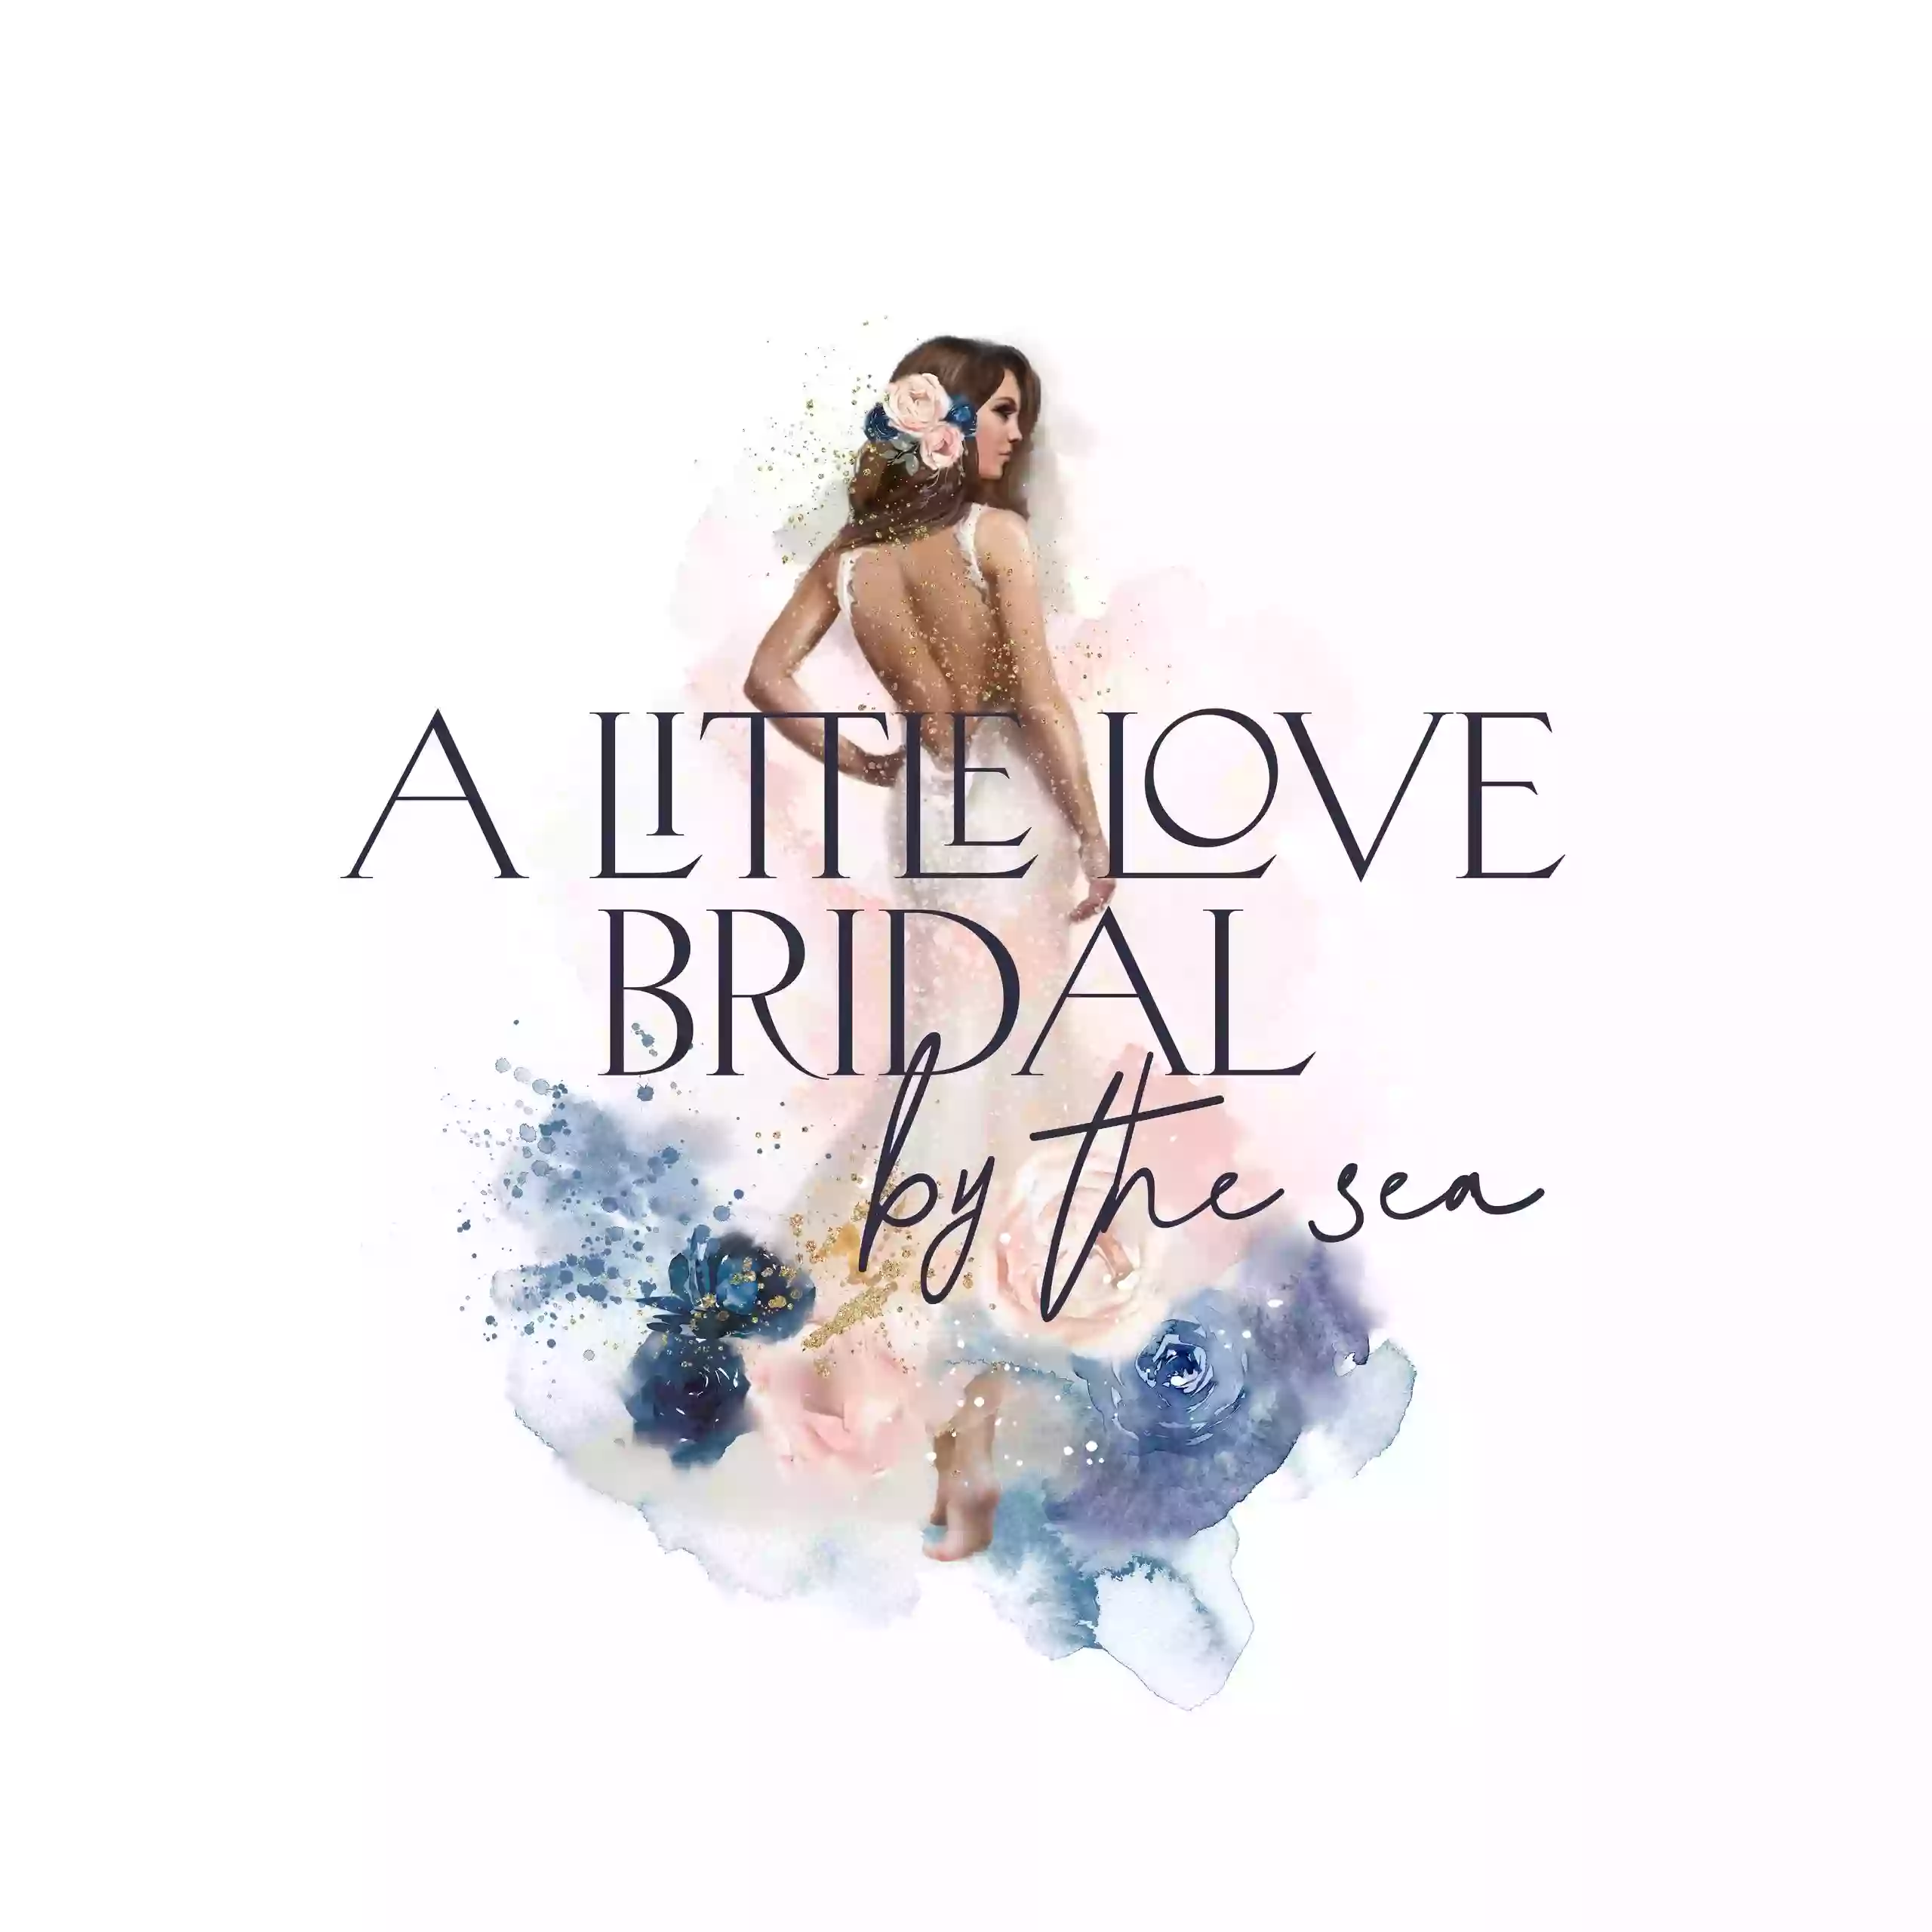 A Little Love Bridal by the sea